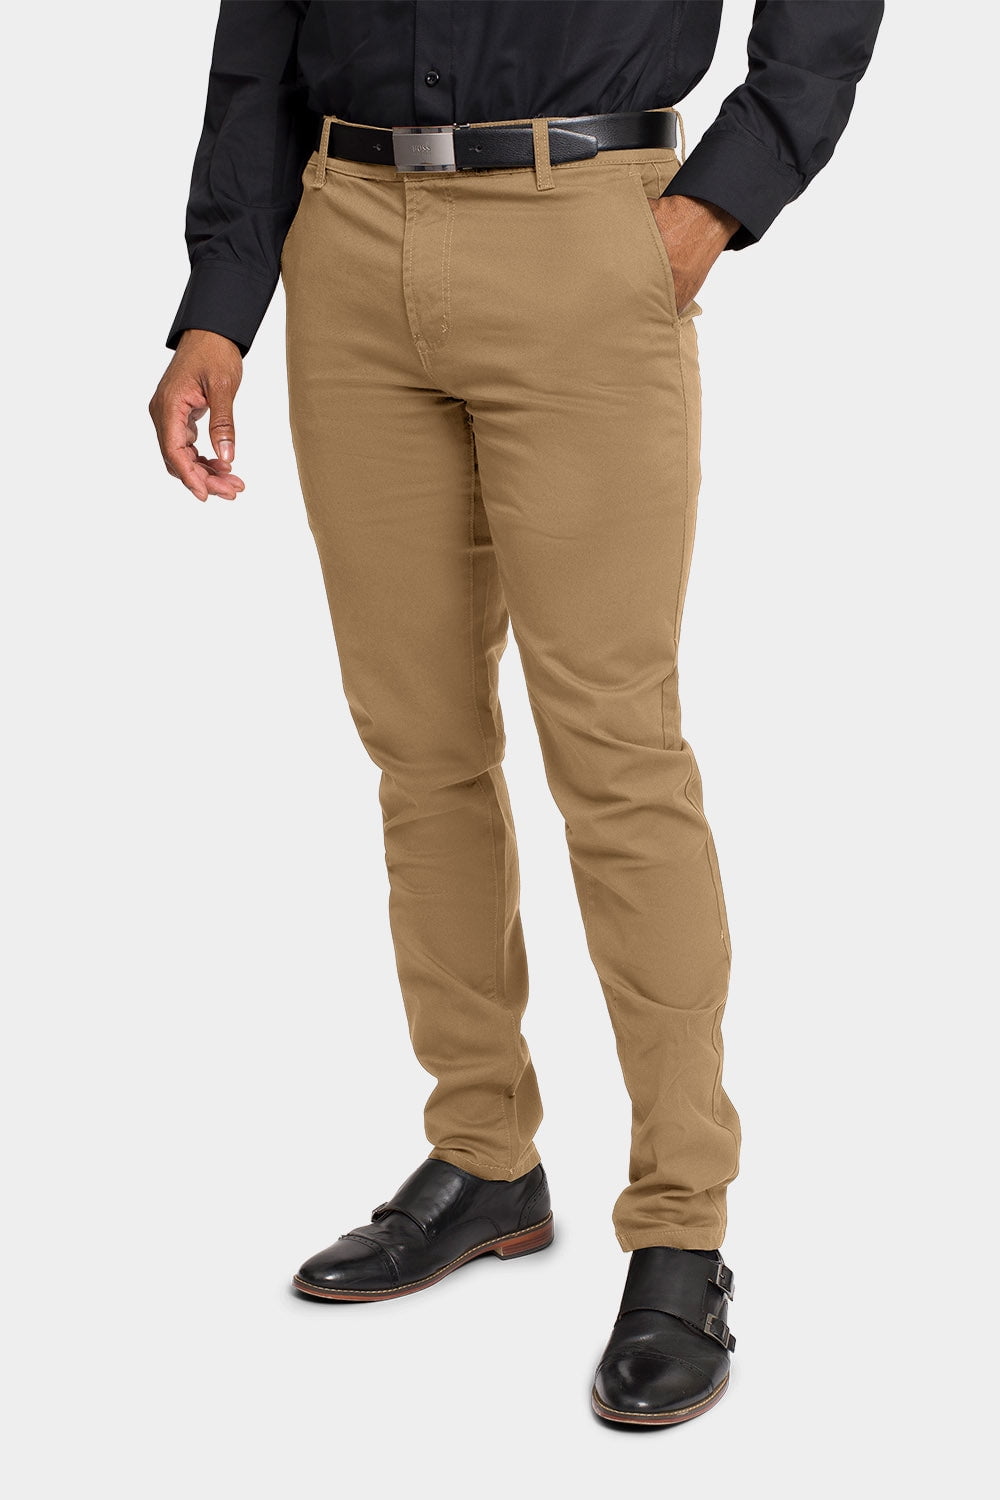 Buy Savoy Blue Mens Chino Pants For Men Online in India at Beyoung